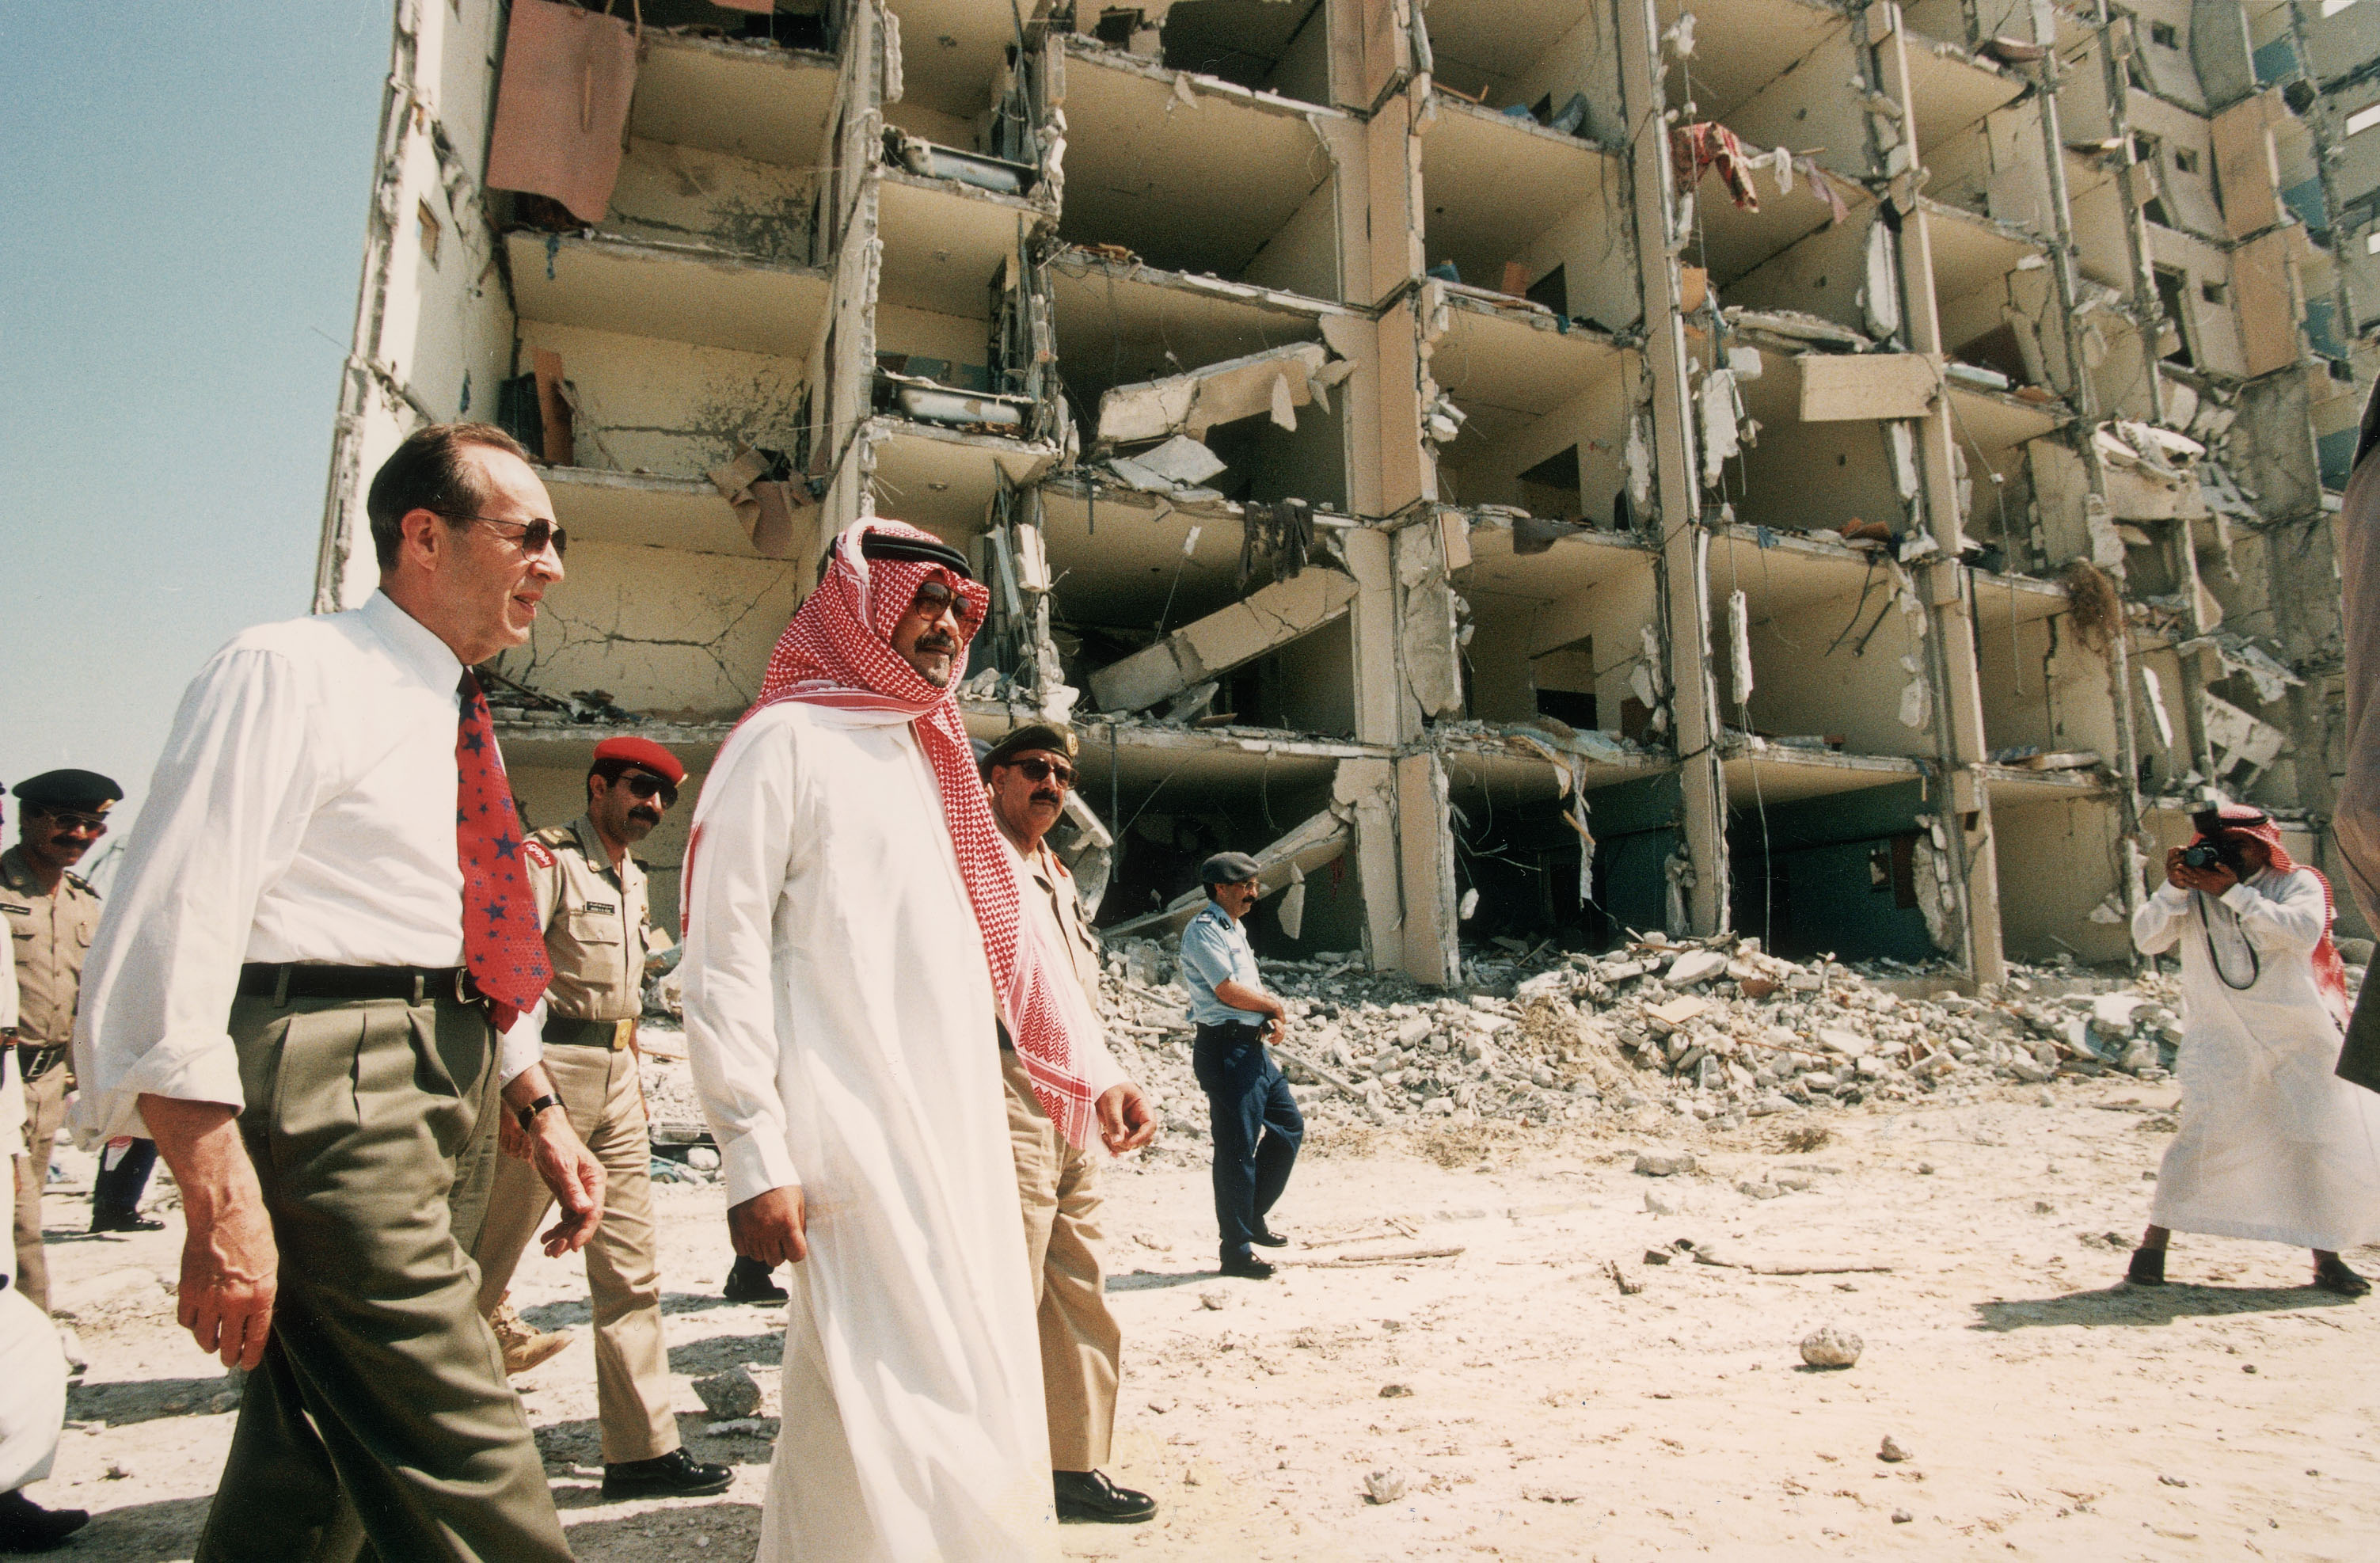 Photo above: Then-U.S. Secretary of Defense William Perry tours the wreckage of Khobar Towers in Dhahran, Saudi Arabia on June 29, 1996 after a truck bomb exploded four days previously, killing 19 American servicemen residing there. Photo by Scott Peterson/Getty Images.